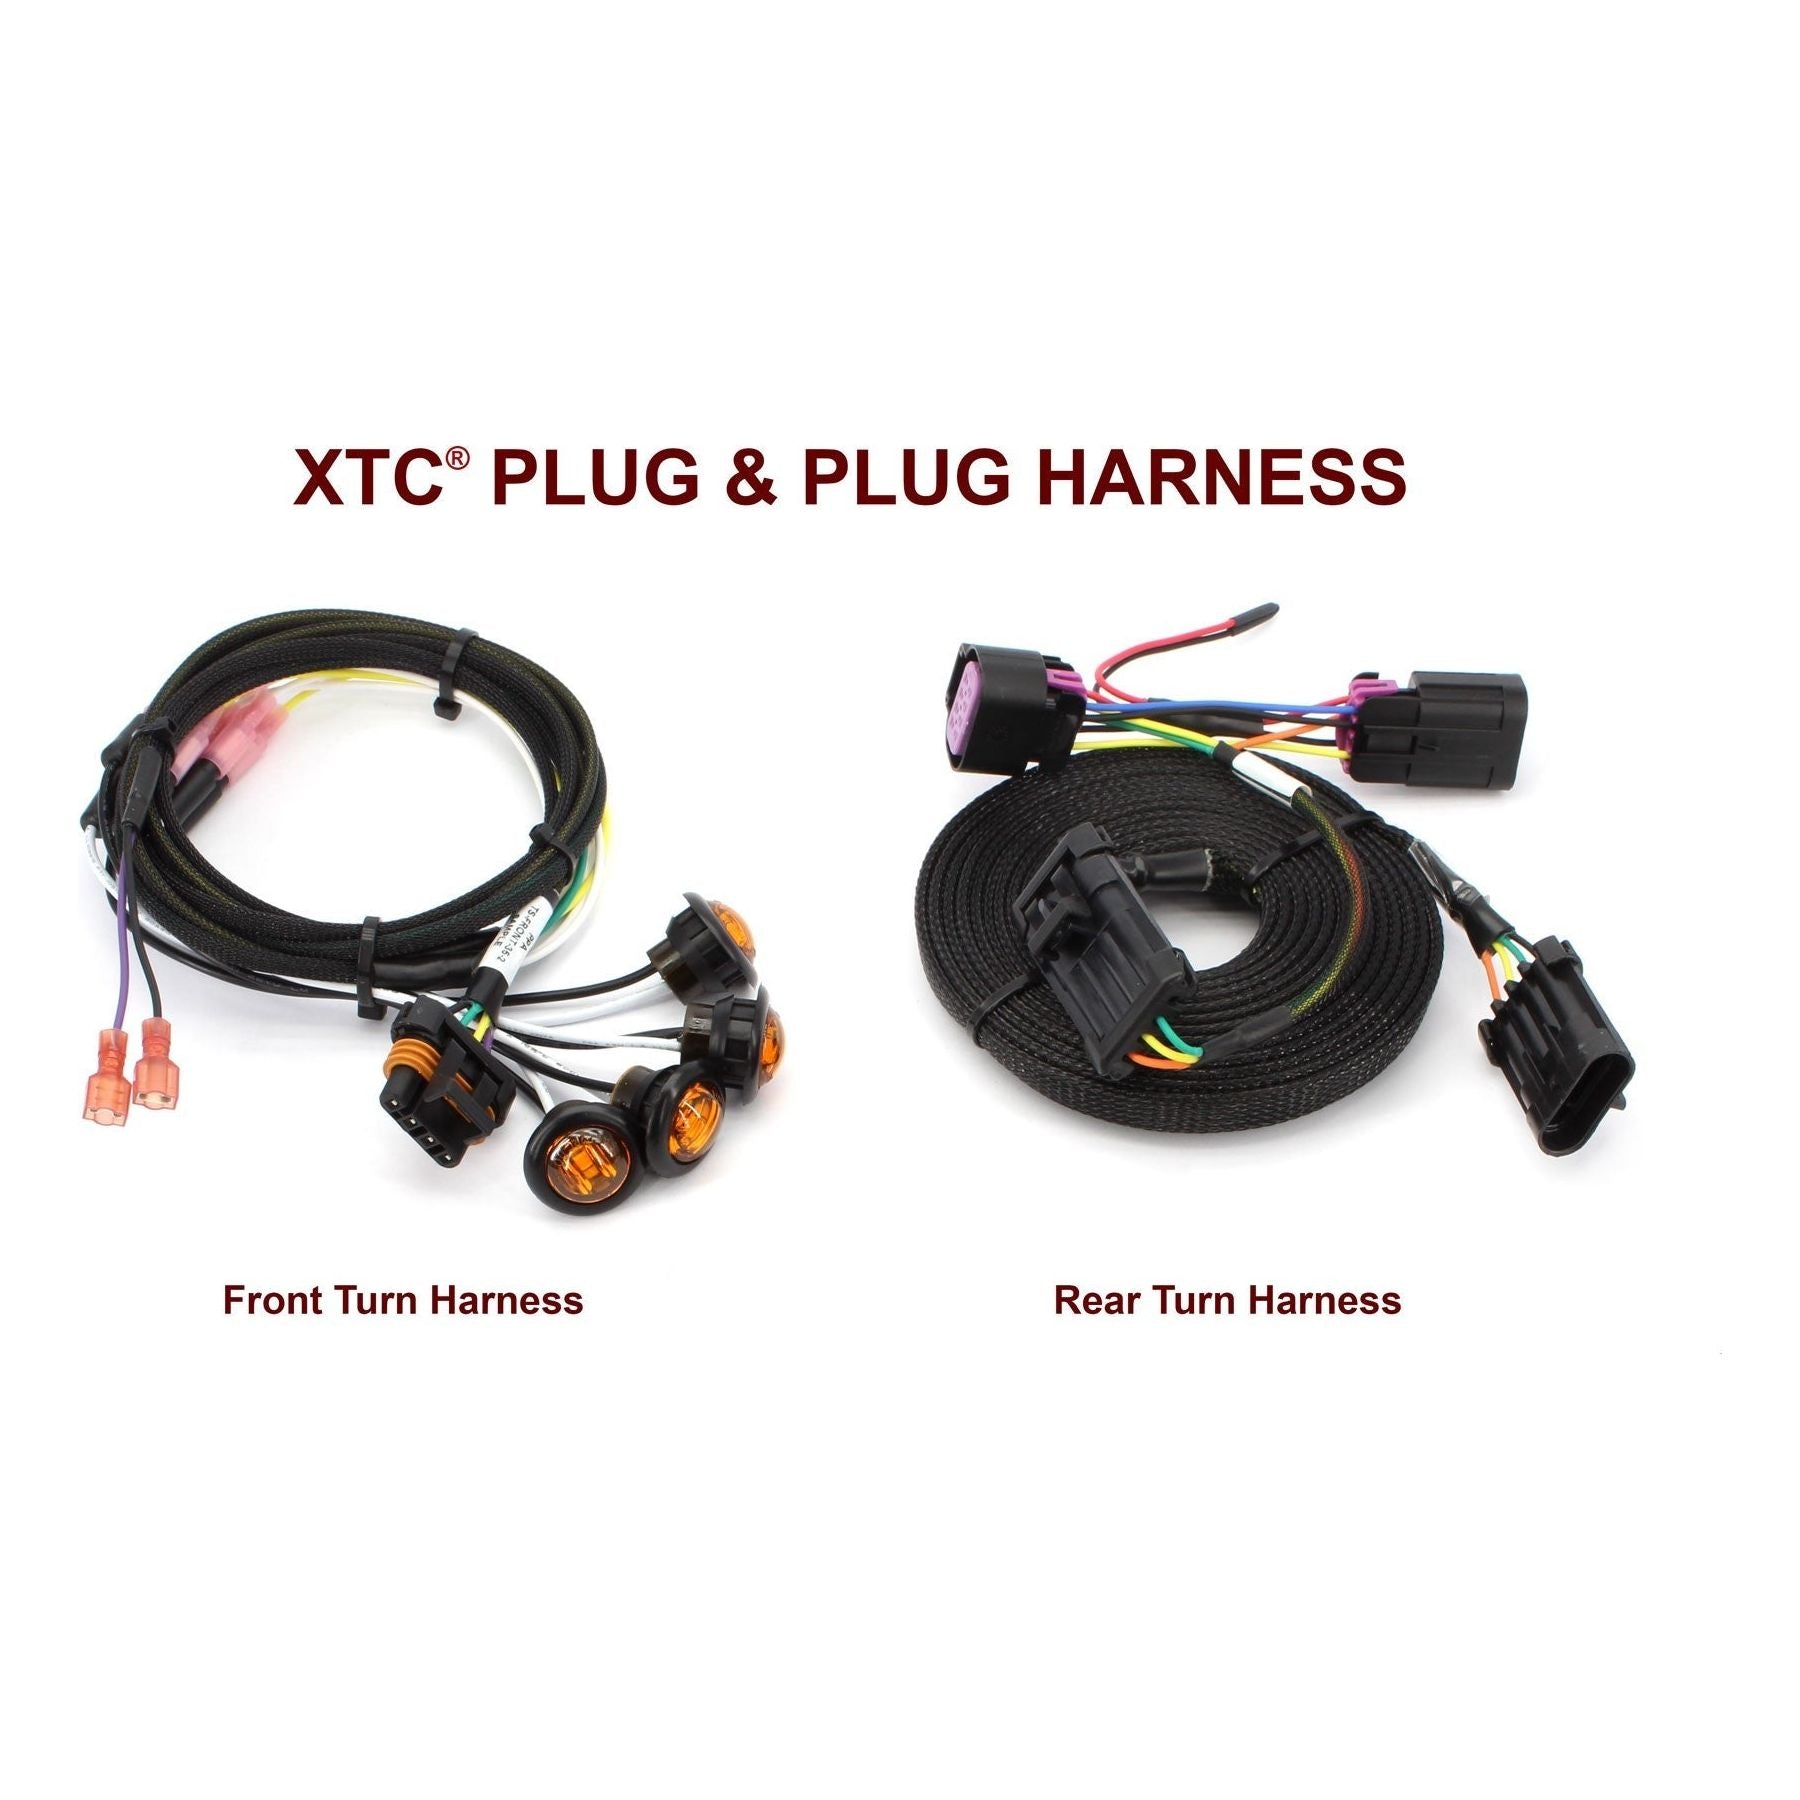 Polaris Xpedition Self-Canceling Turn Signal System with Horn | XTC Power Products